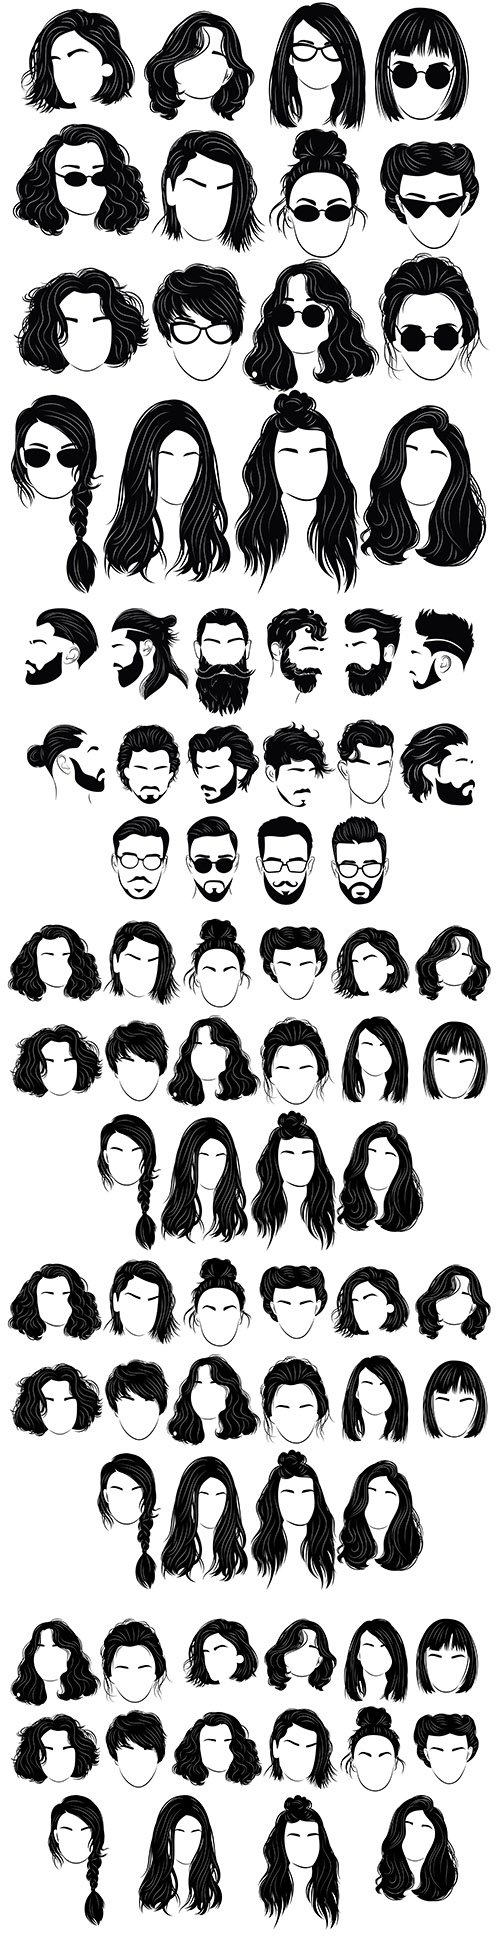 Female and male hairstyle design silhouettes